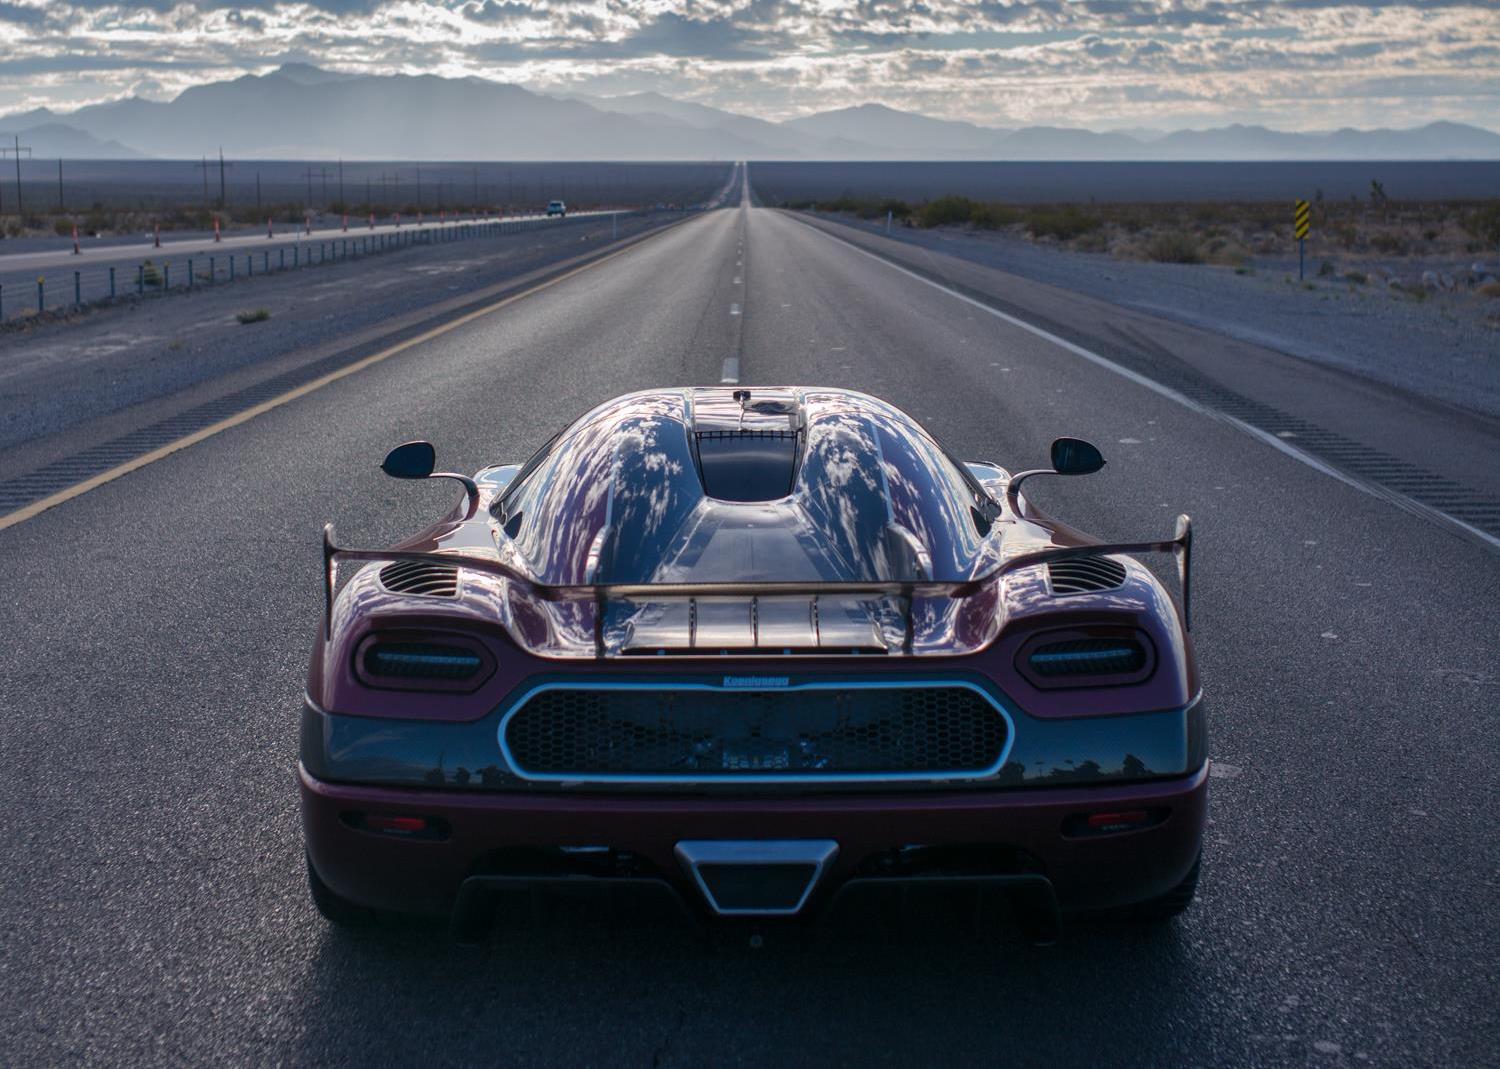 Koenigsegg Agera RS sets top speed record, new fastest car in the world